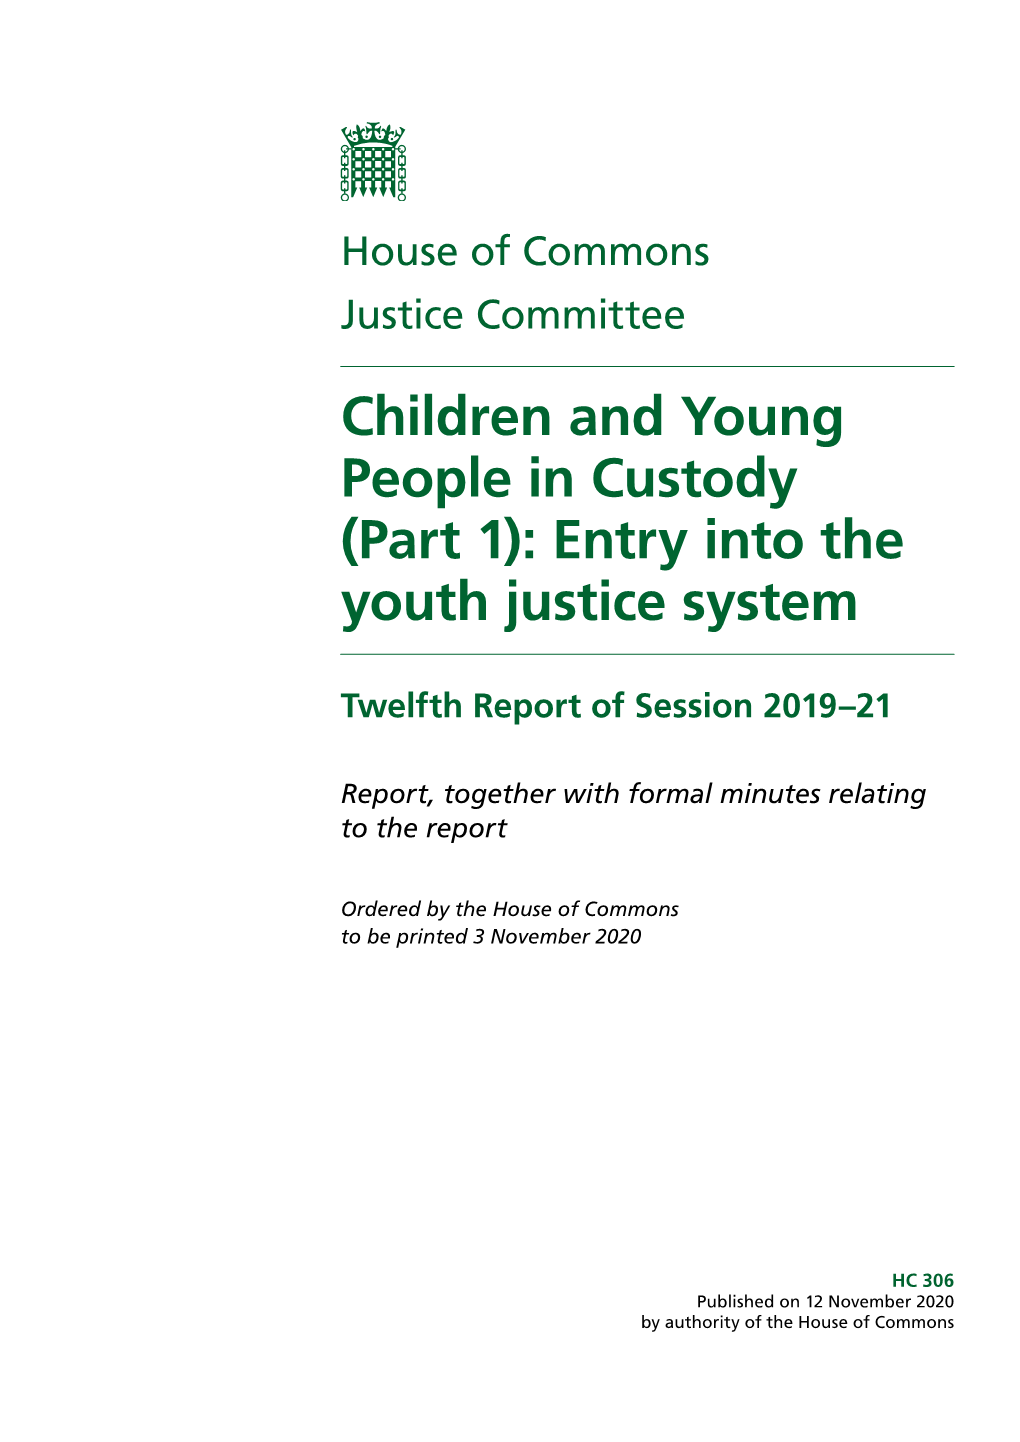 Children and Young People in Custody (Part 1): Entry Into the Youth Justice System